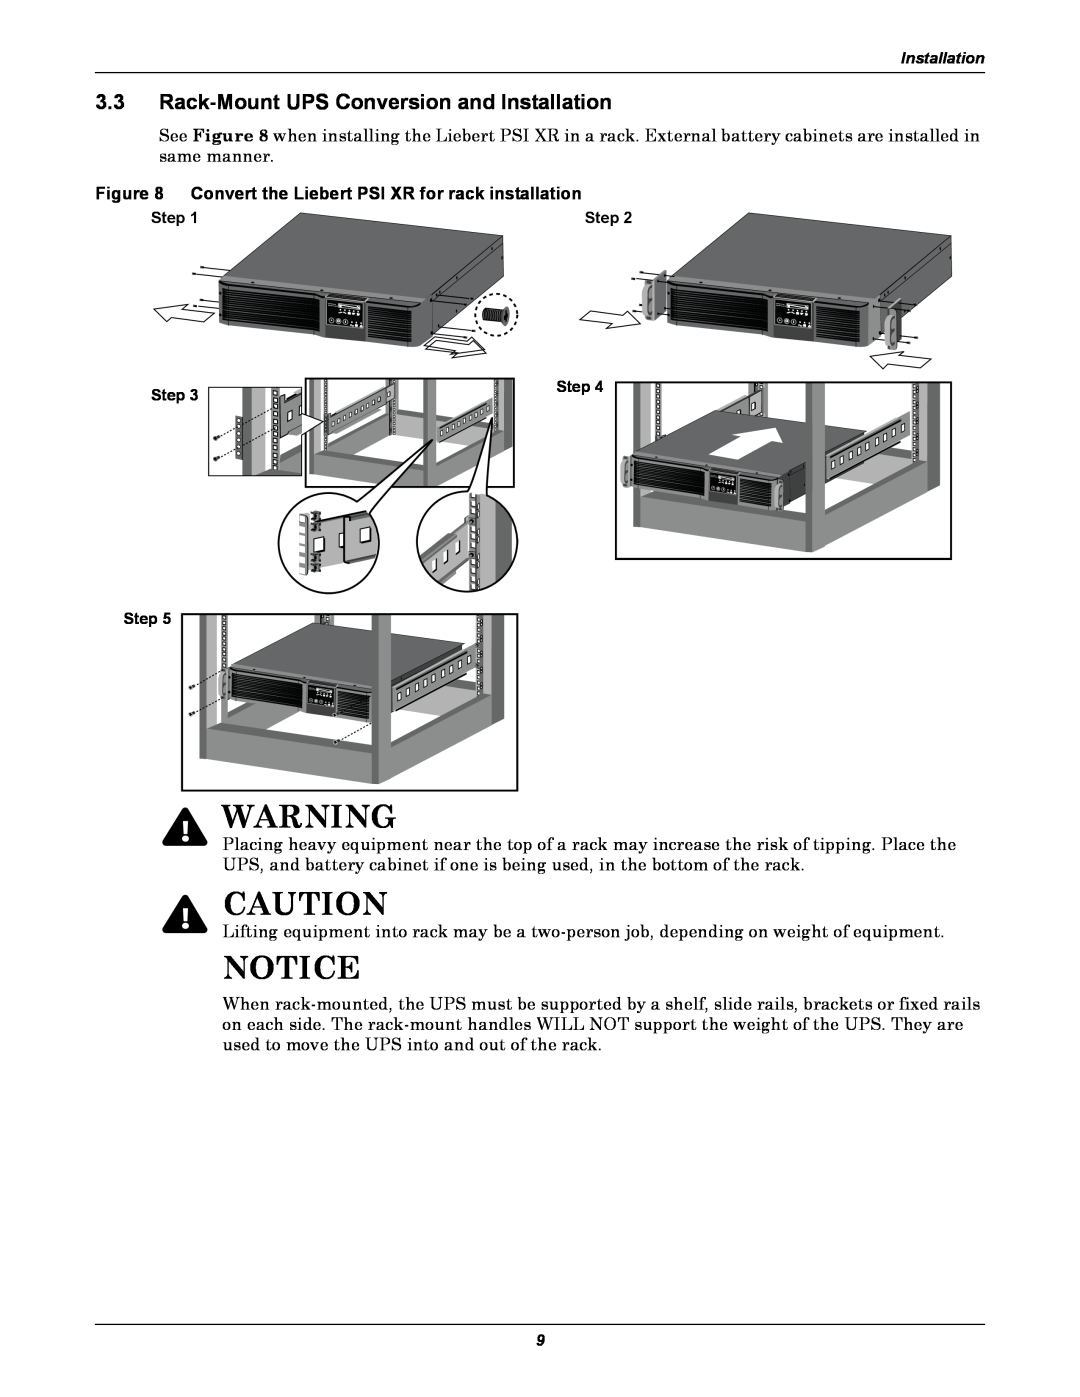 Emerson 1500, 3000, 1000, 2200 user manual Notice, 3.3Rack-MountUPS Conversion and Installation 